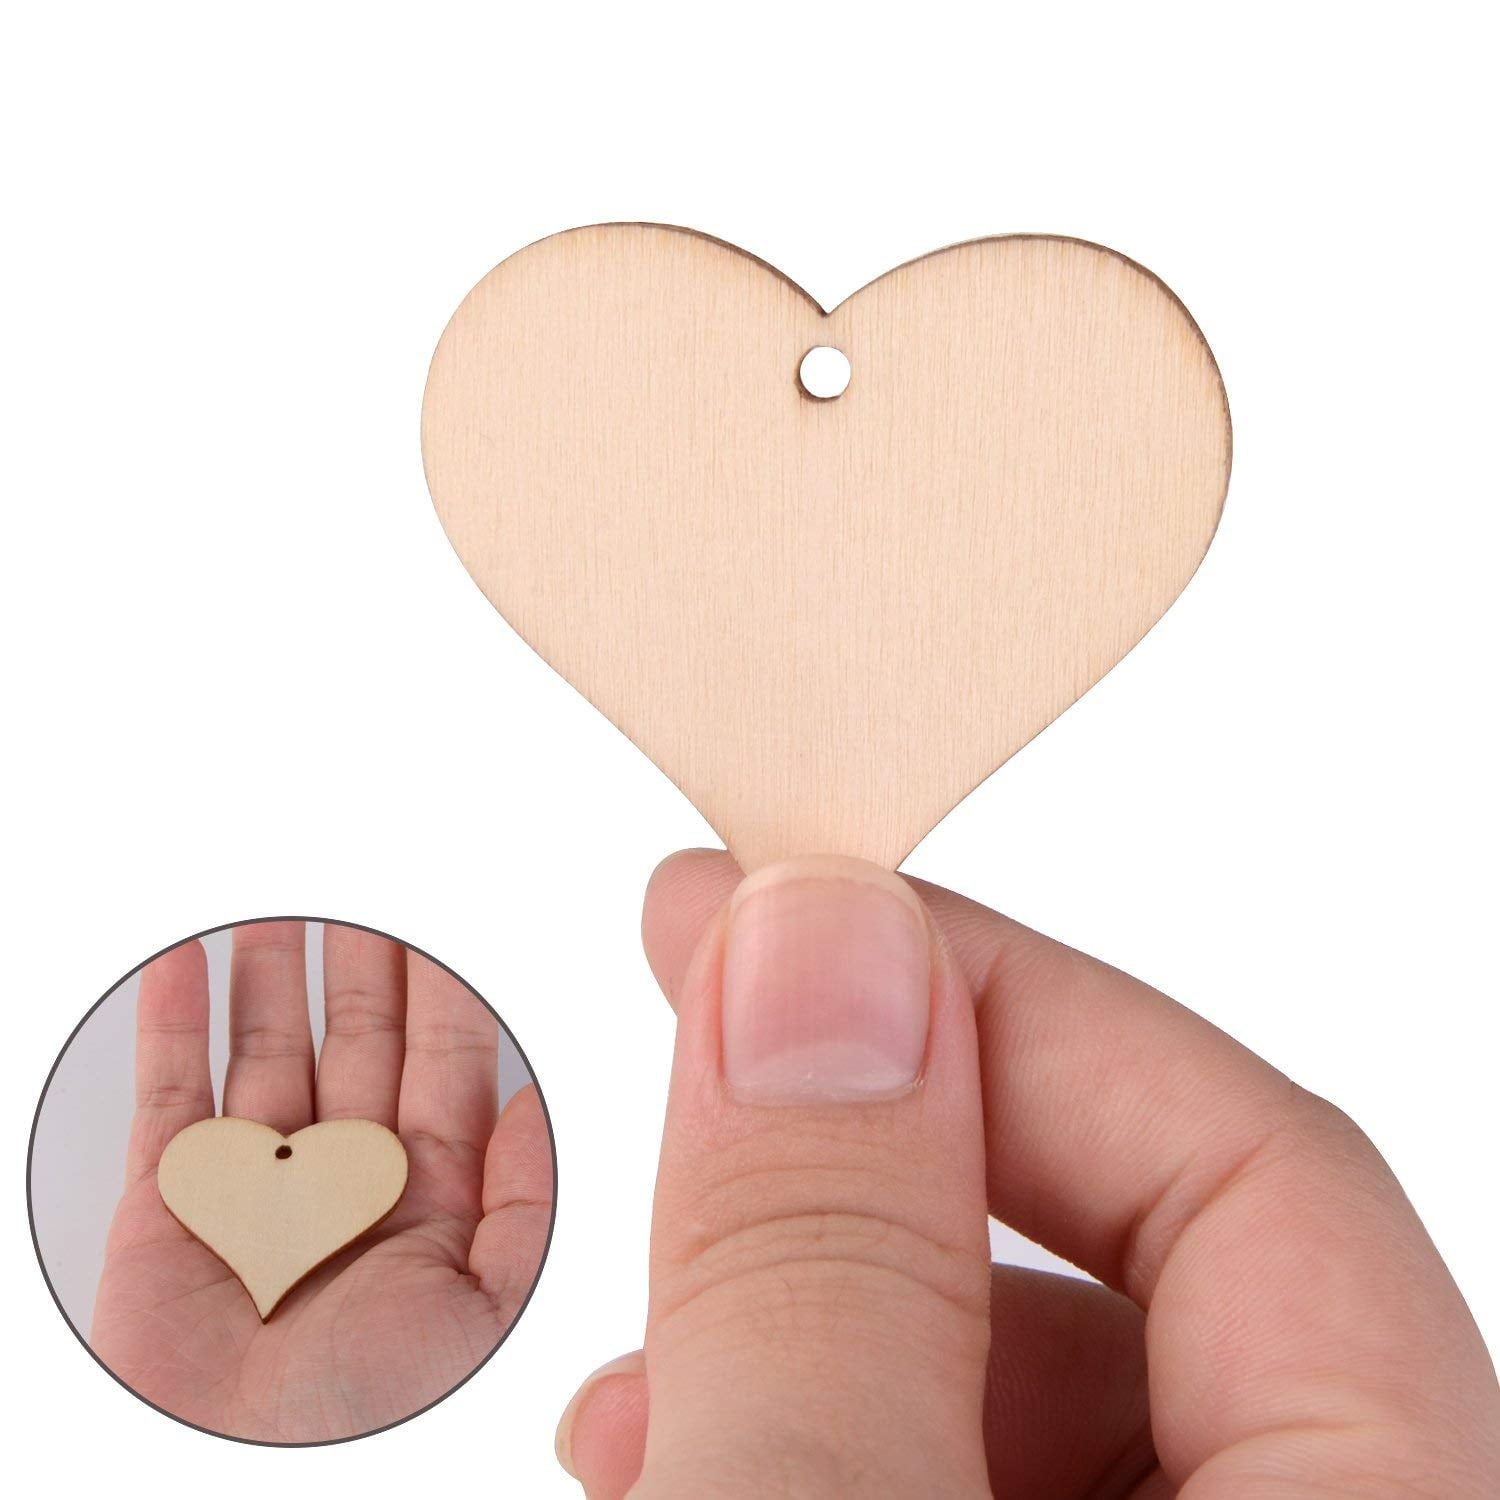 4336843818 UTOPER Wooden Love Heart Slices Blank Name Tags Wood Art Craft Pieces for Wedding DIY Projects Card Making 100pcs, 47mm